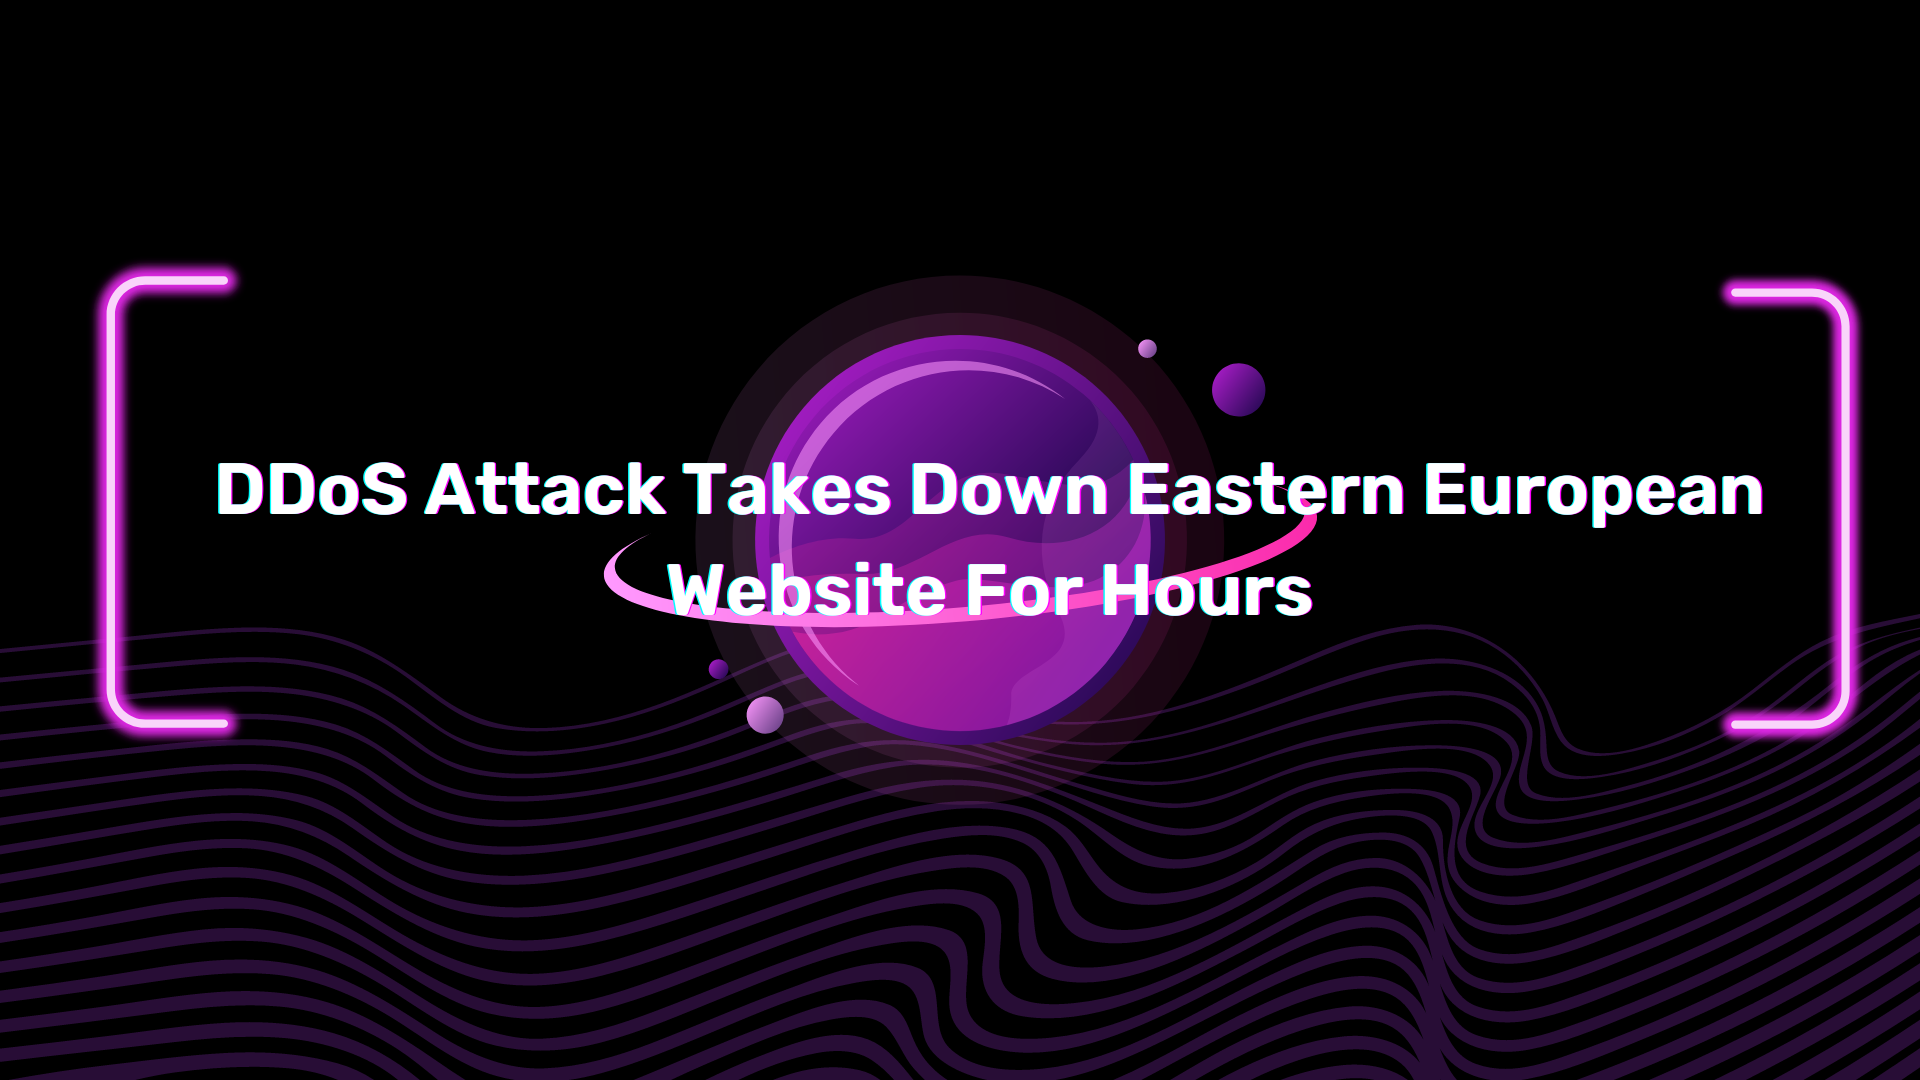 DDoS Attack Takes Down Eastern European Website For Hours